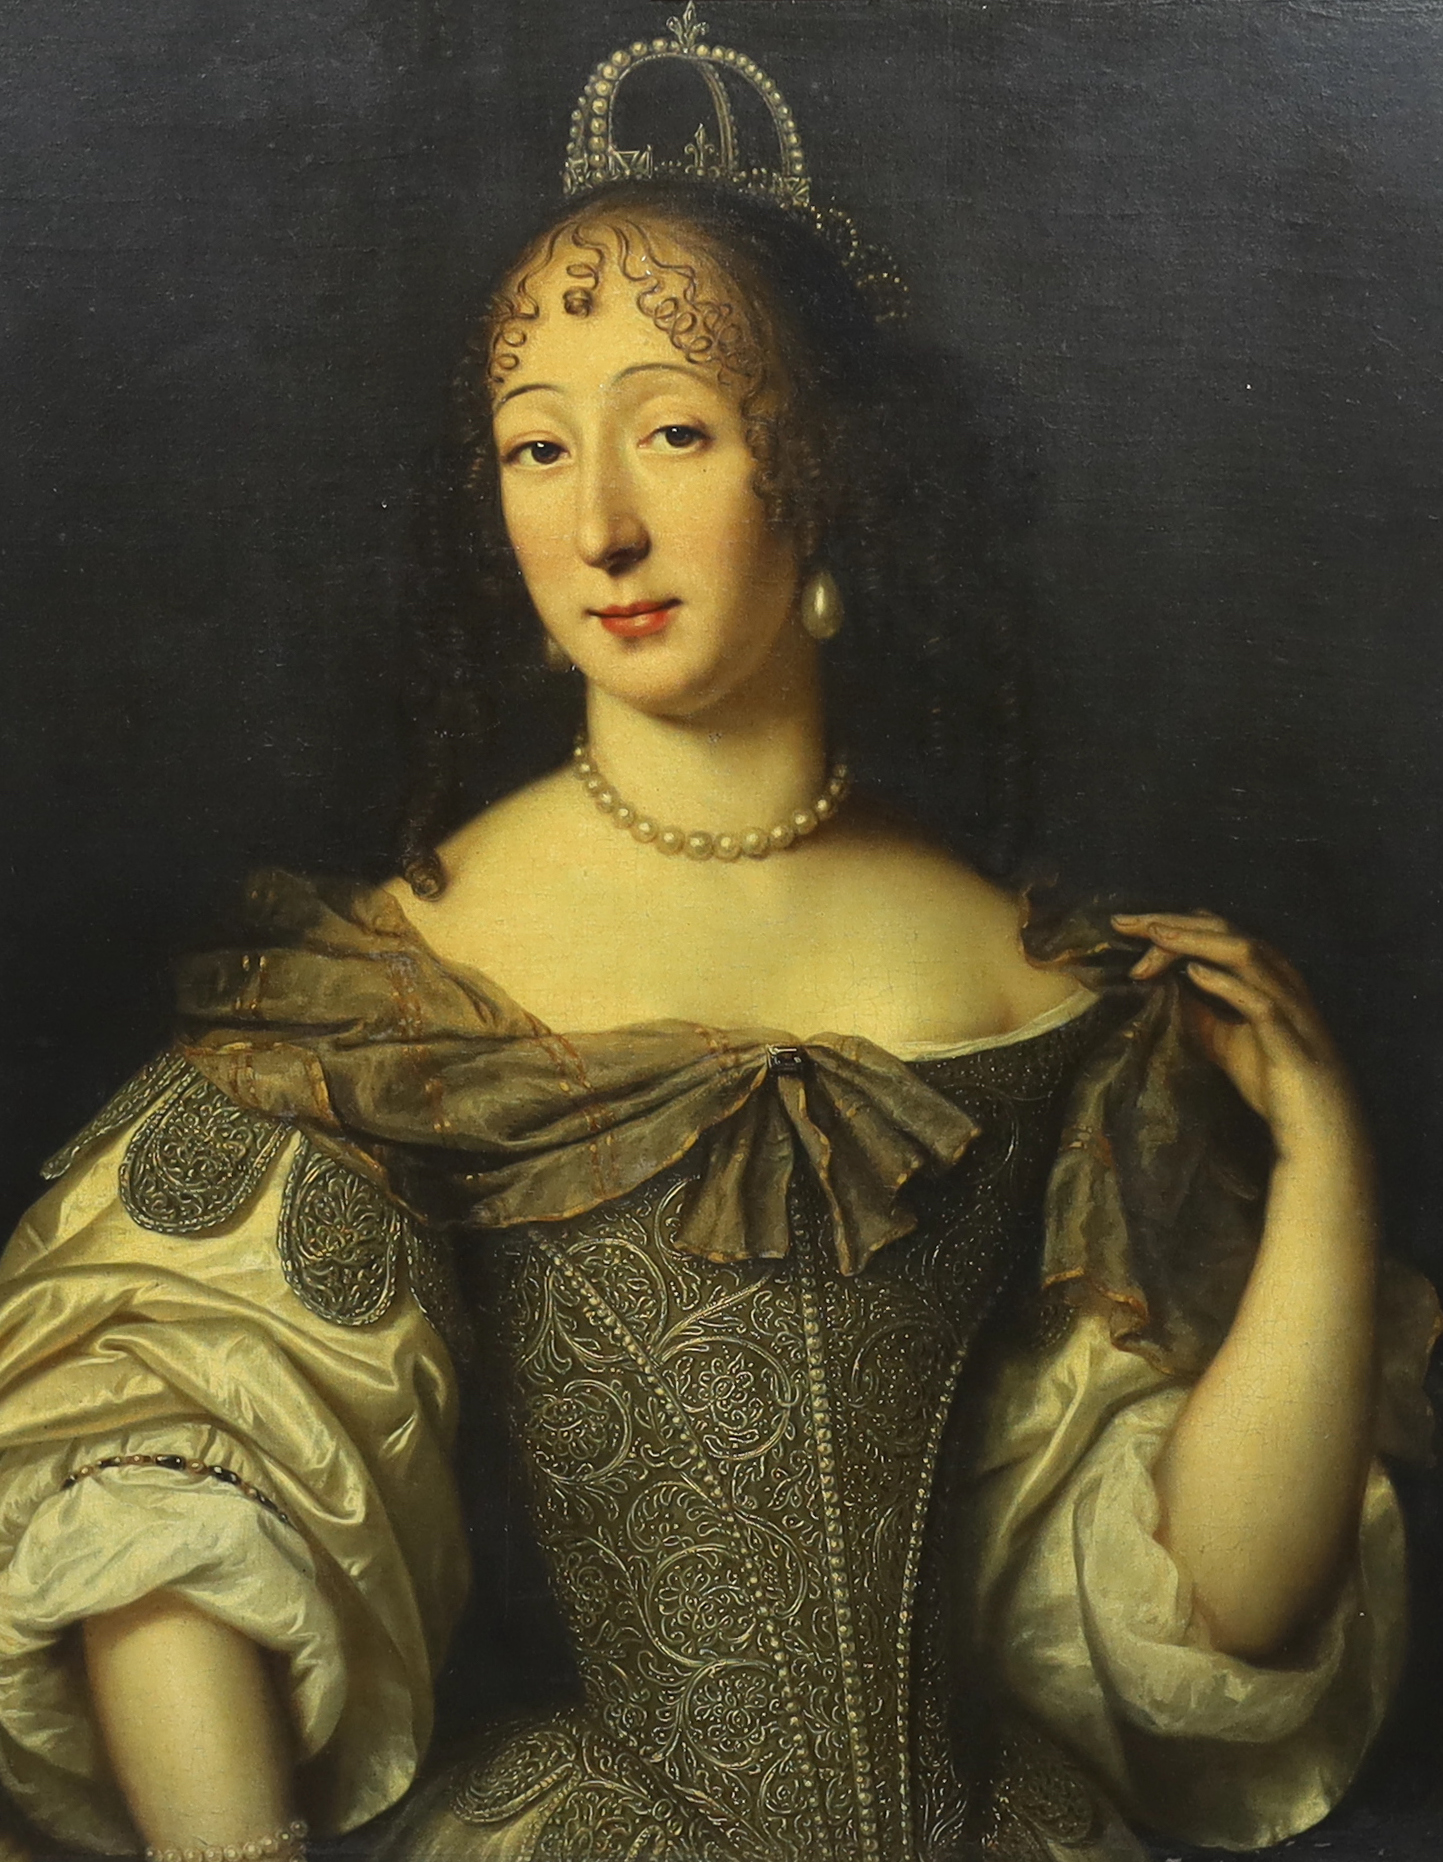 Attributed to Pieter Nason (Dutch, 1612-1688), Portrait of a noble woman wearing a pearl set crown and elaborate embroidered dress, oil on canvas, 80 x 63cm